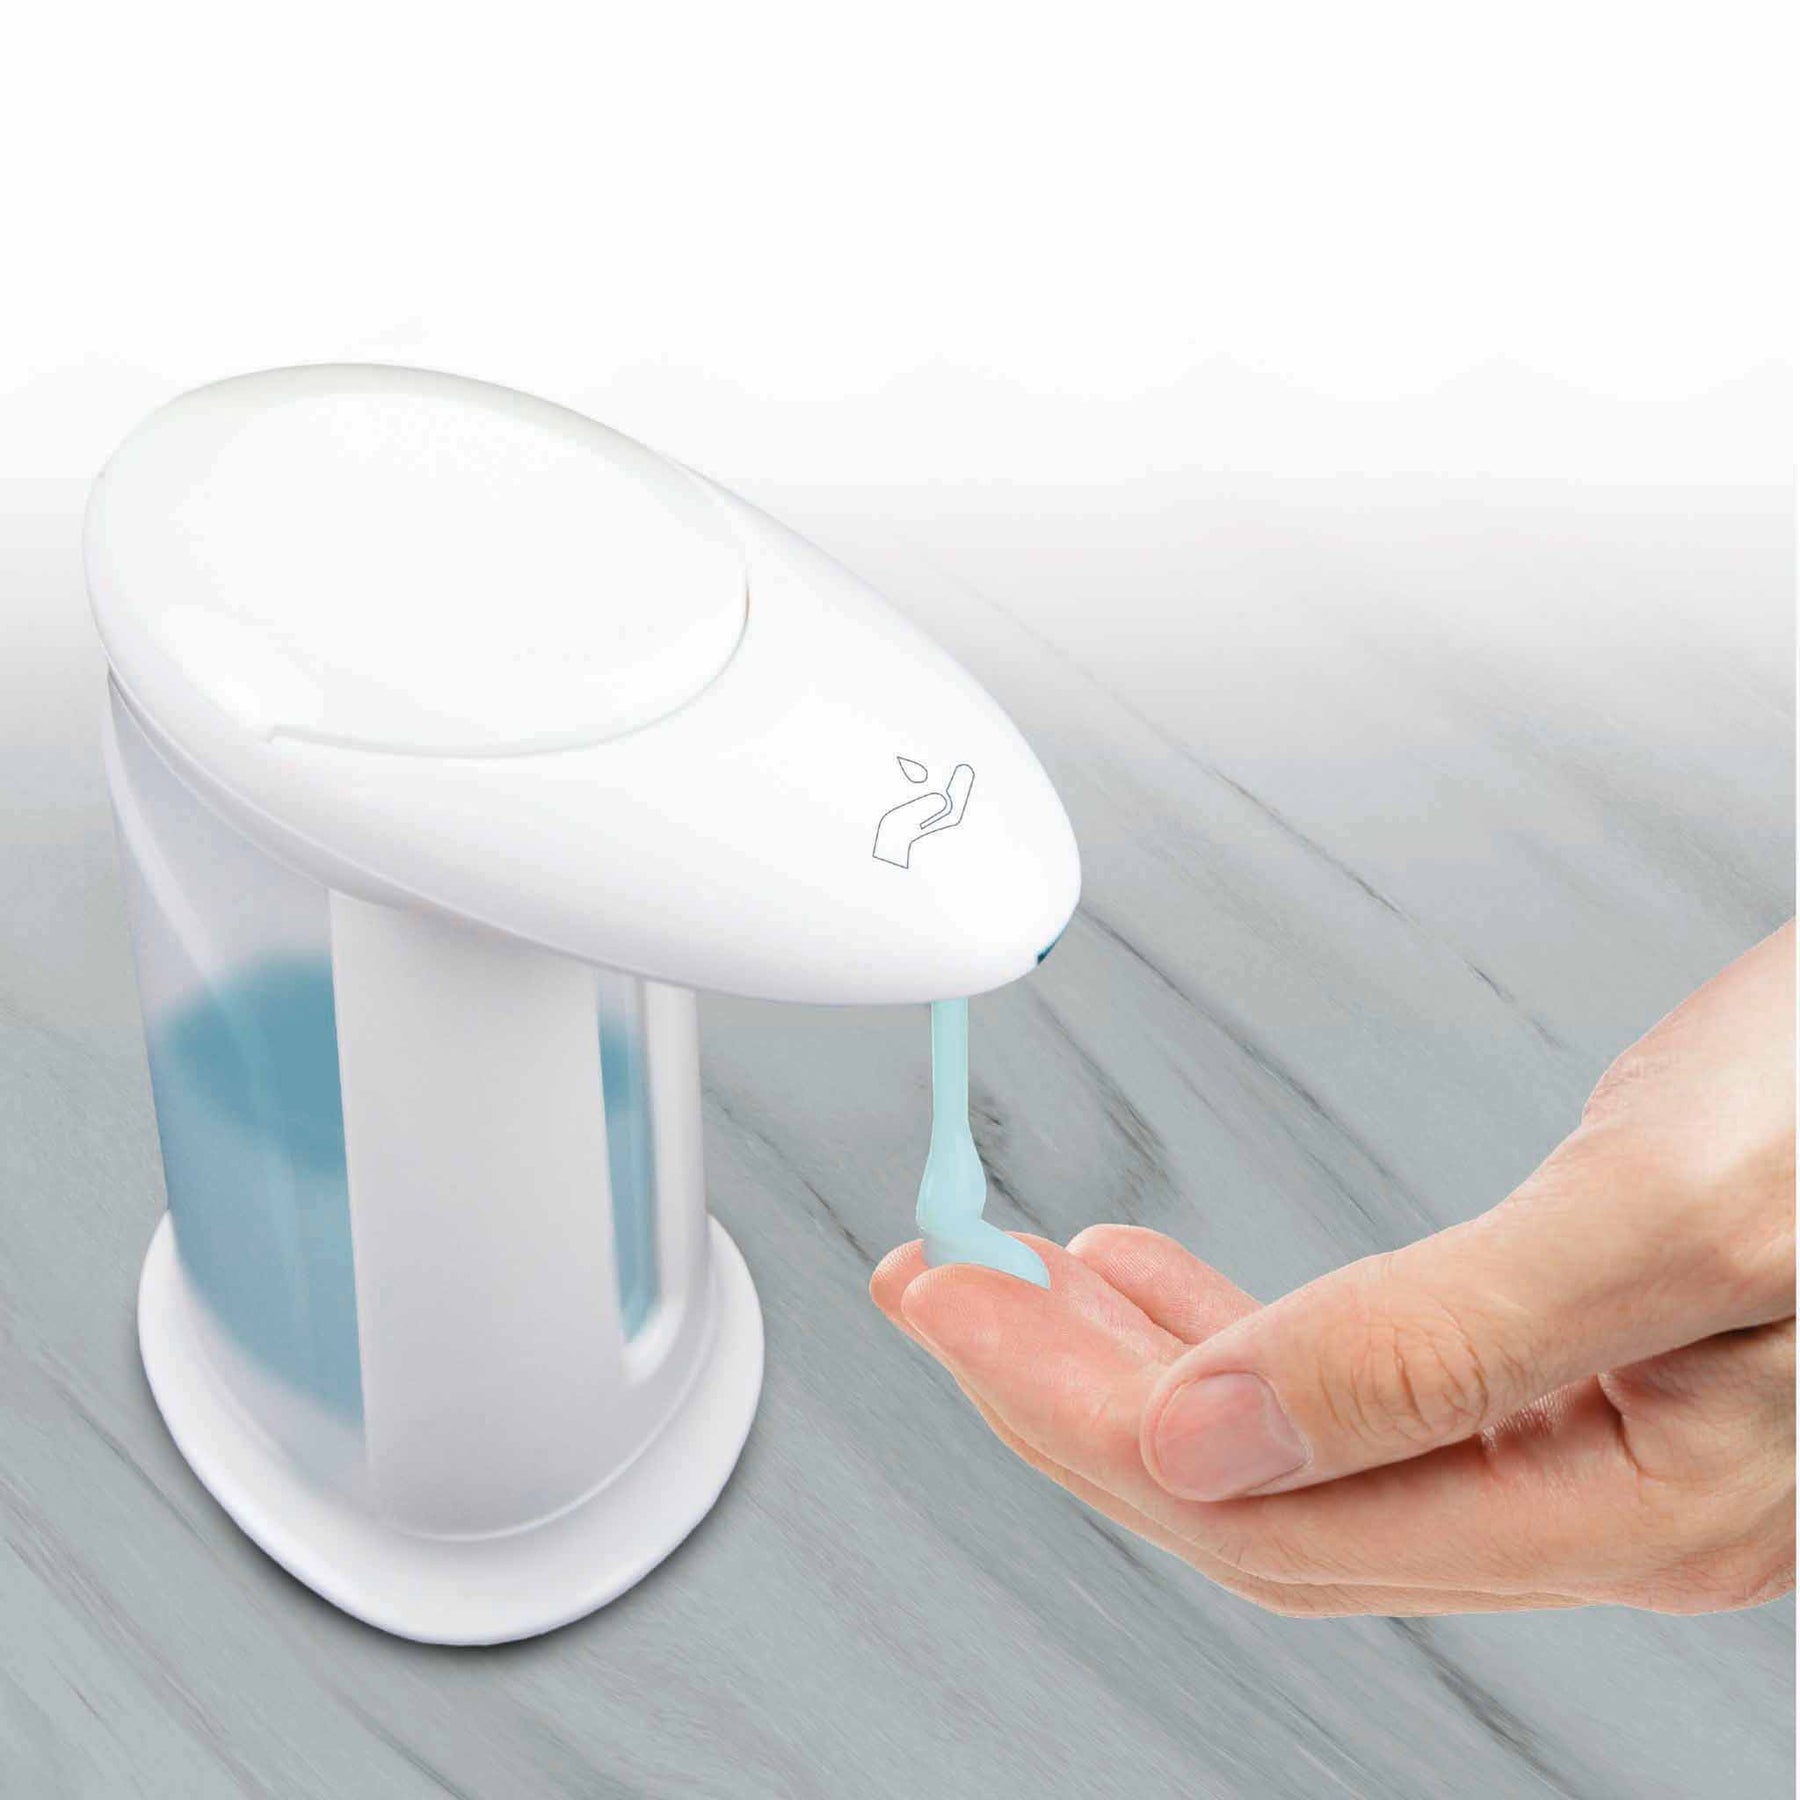 mooas Automatic Liquid Soap Dispenser, Stainless Steel Touchless Hand Soap  Dispenser with 3 Adjustable Levels, waterproof IPX5 Equipped Infrared